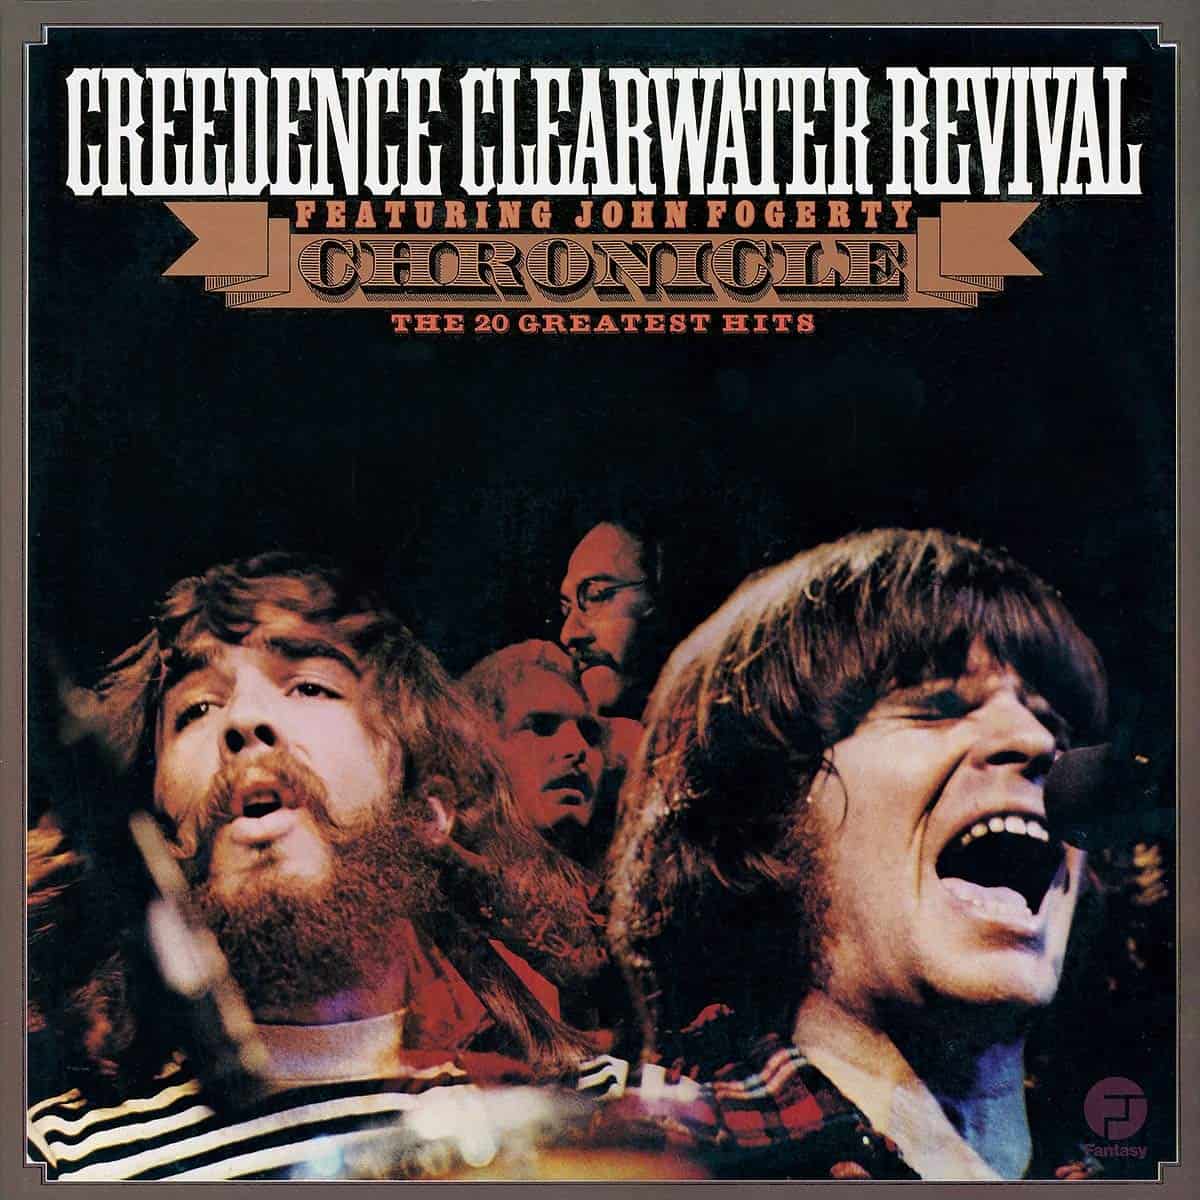 Creedence-Clearwater-Revival-Chronicle-20-Greatest-Hits-vinyl-record-album1